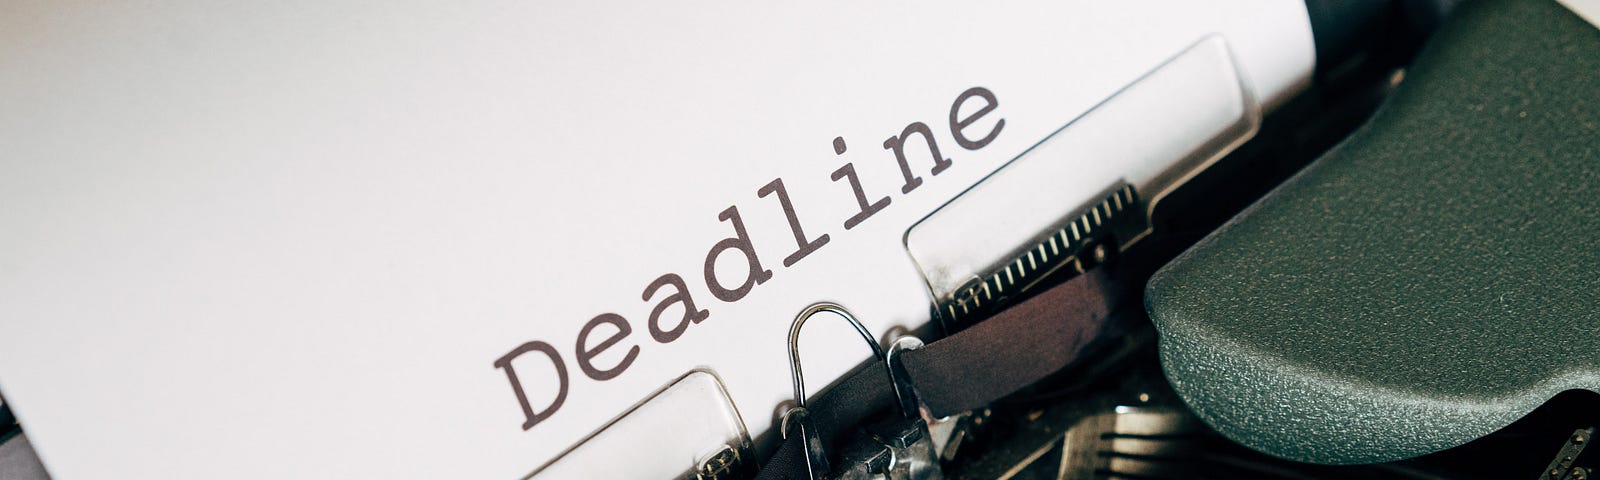 Deadline for stories to be submitted.